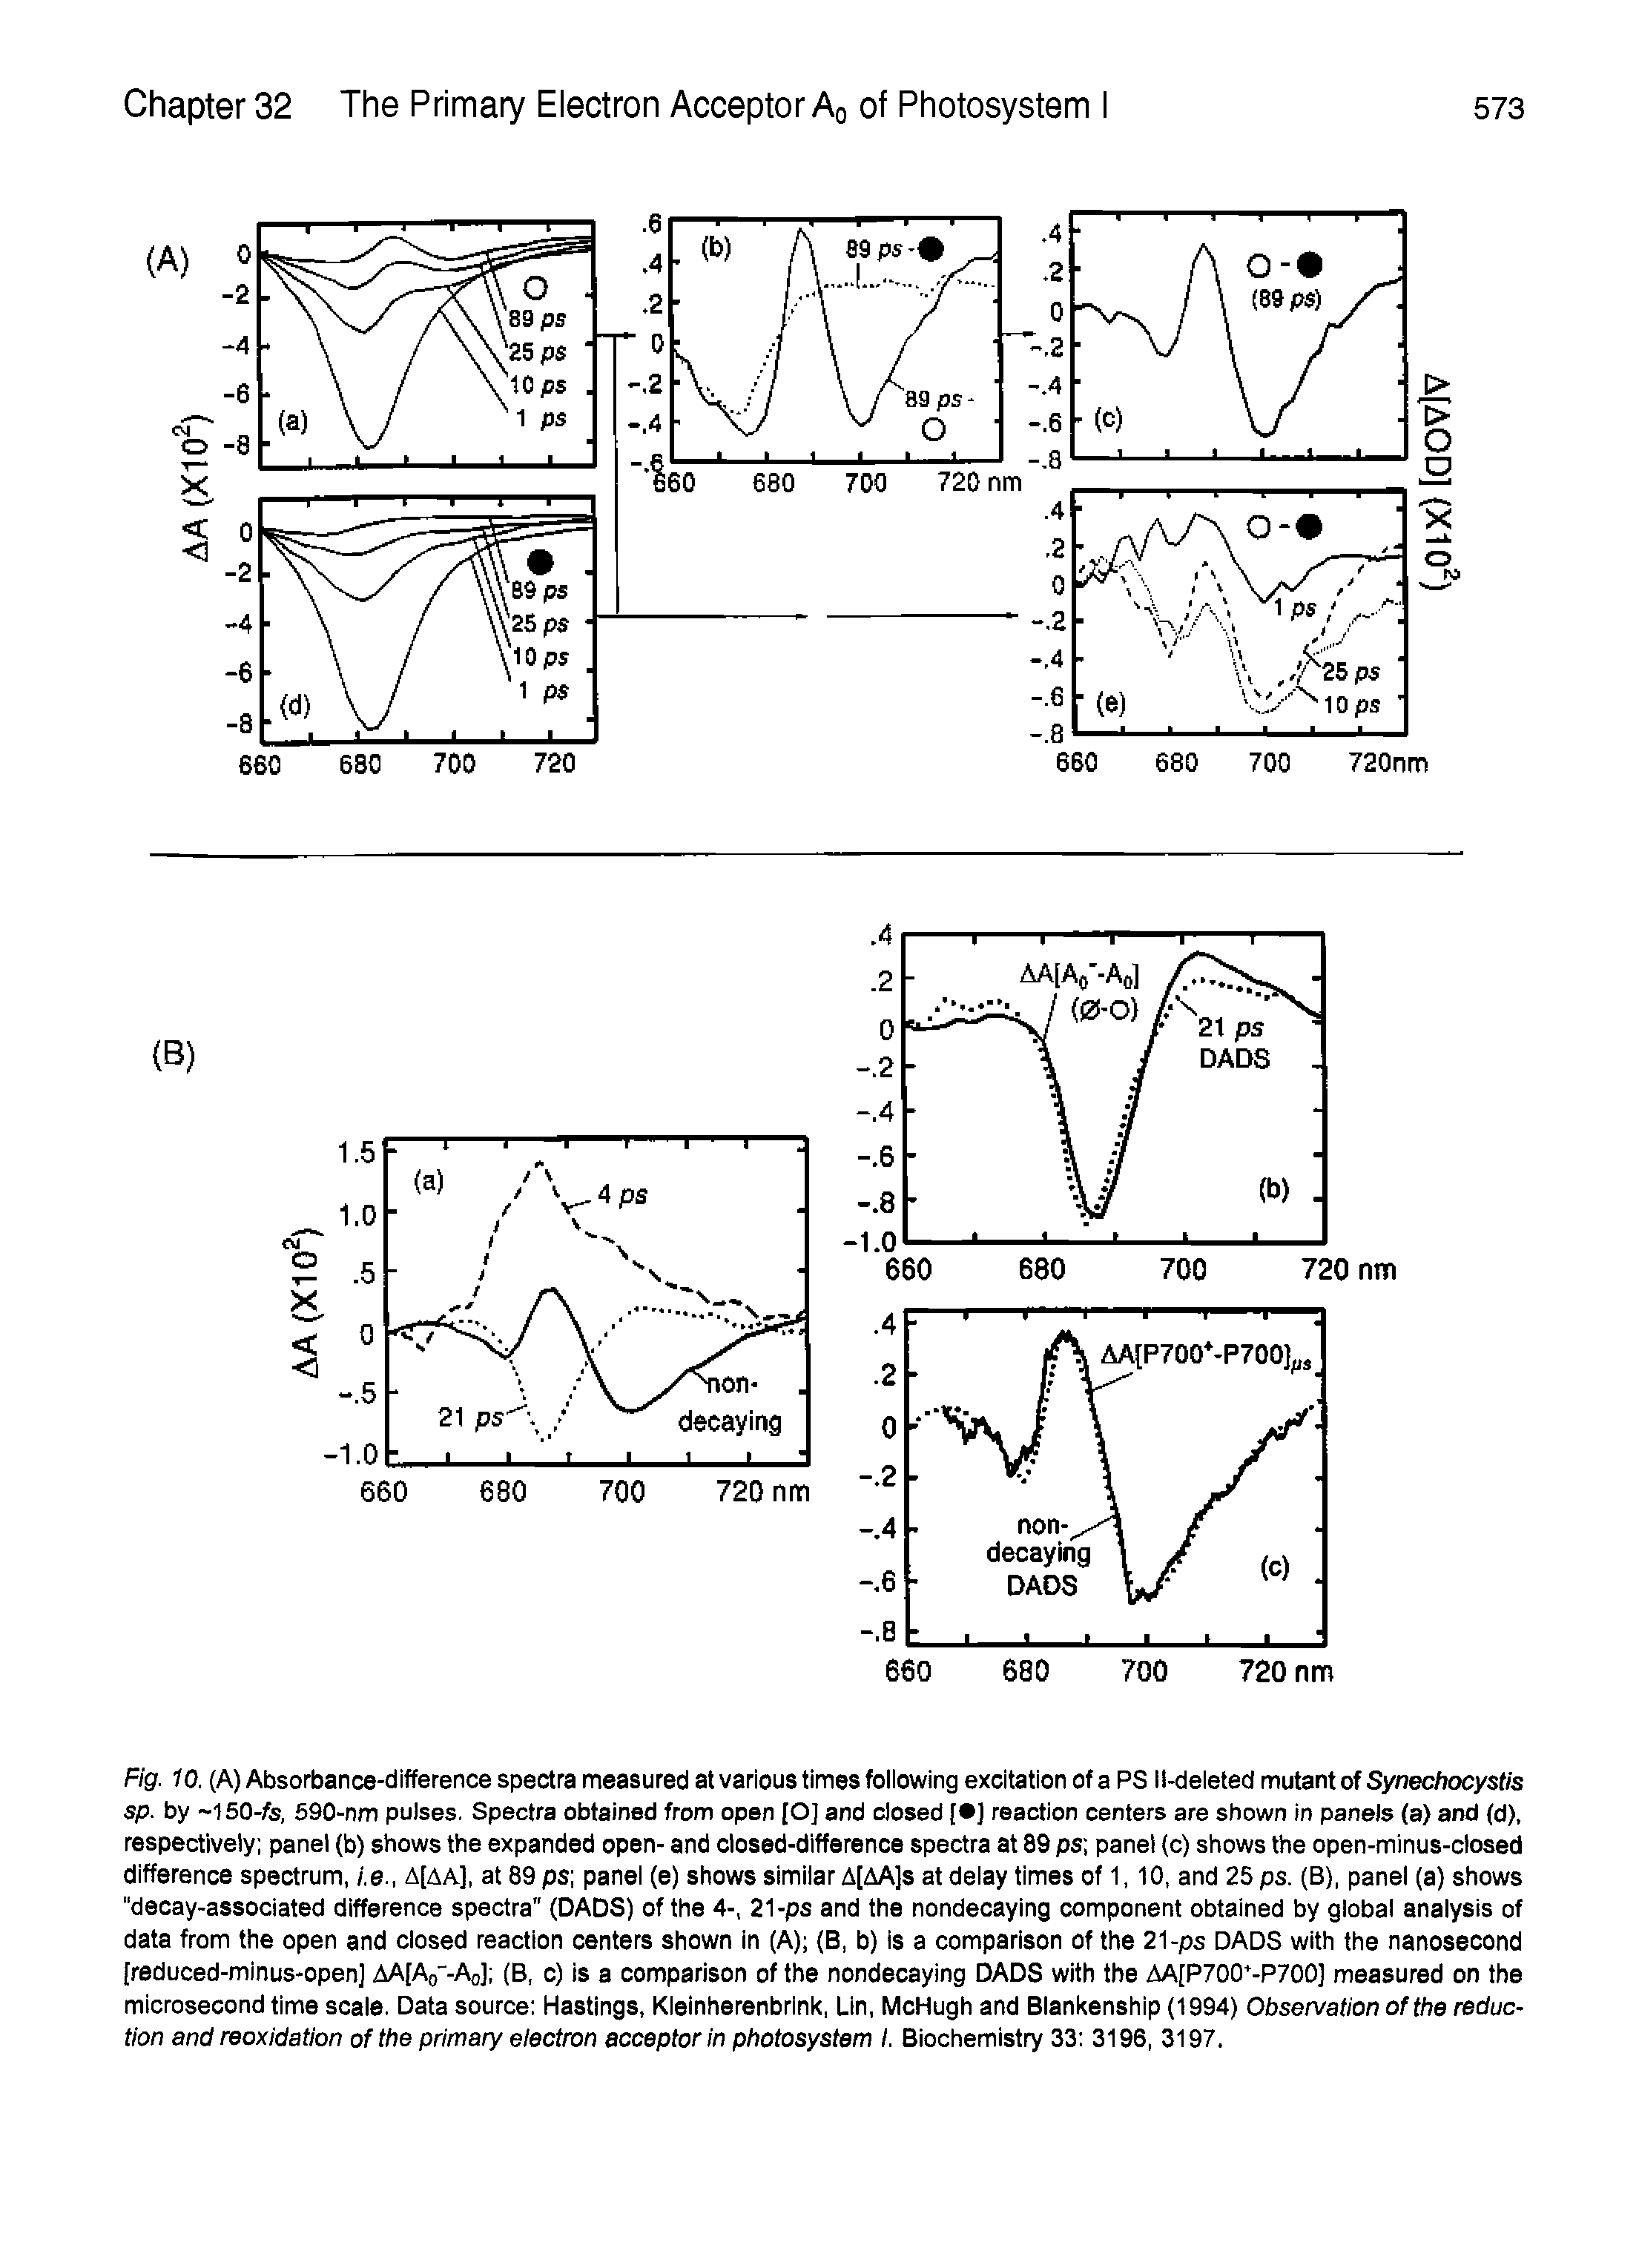 Fig. 10. (A) Absorbance-difference spectra measured at various times foliowing excitation of a PS ll-deieted mutant of Synechocystis sp. by l50-fe, 590-nm pulses. Spectra obtained from open [O] and closed [ ) reaction centers are shown in panels (a) and (d). respectively panel (b) shows the expanded open- and closed-difference spectra at 89 ps panel (c) shows the open-minus-closed difference spectrum, /.e., A[aa], at 89 ps panei (e) shows simiiar A[AA]s at deiay times of 1,10, and 25 ps. (B), panel (a) shows "decay-associated difference spectra" (DADS) of the 4-, 21-ps and the nondecaying component obtained by global analysis of data from the open and closed reaction centers shown in (A) (B, b) is a comparison of the 21-ps DADS with the nanosecond [reduced-minus-open] AA[Ao"-Ao] (B, c) is a comparison of the nondecaying DADS with the AA[P700 -P700] measured on the microsecond time scale. Data source Hastings, Kleinherenbrink, Lin, McHugh and Blankenship (1994) Observation of the reduction and reoxidation of the primary eiectron acceptor in photosystem i. Biochemistry 33 3196, 3197.